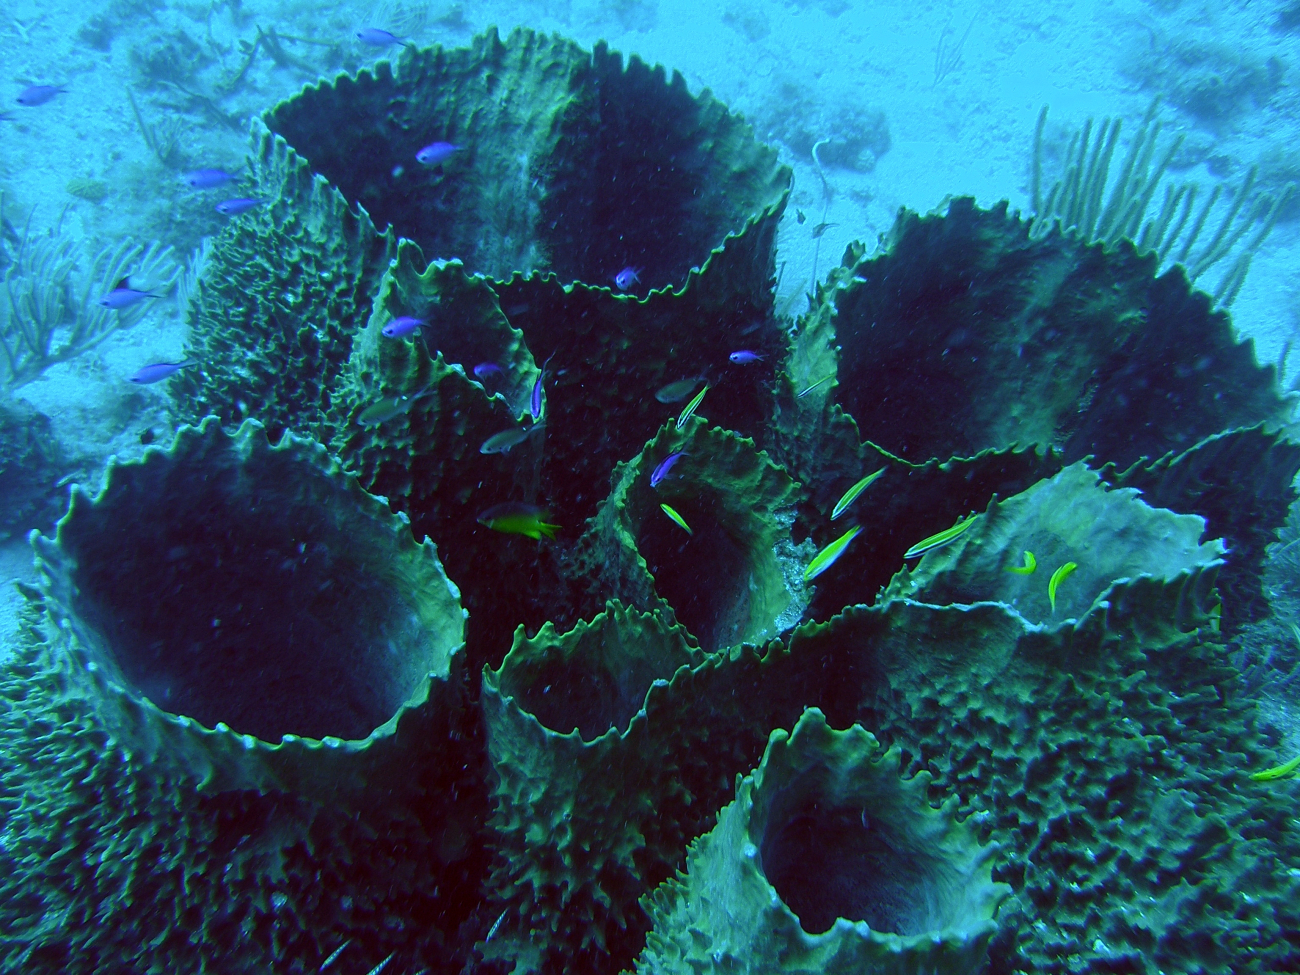 Large barrel sponges (Porifera  sp) with blue chromis (Chromis cyanea) and other fish species